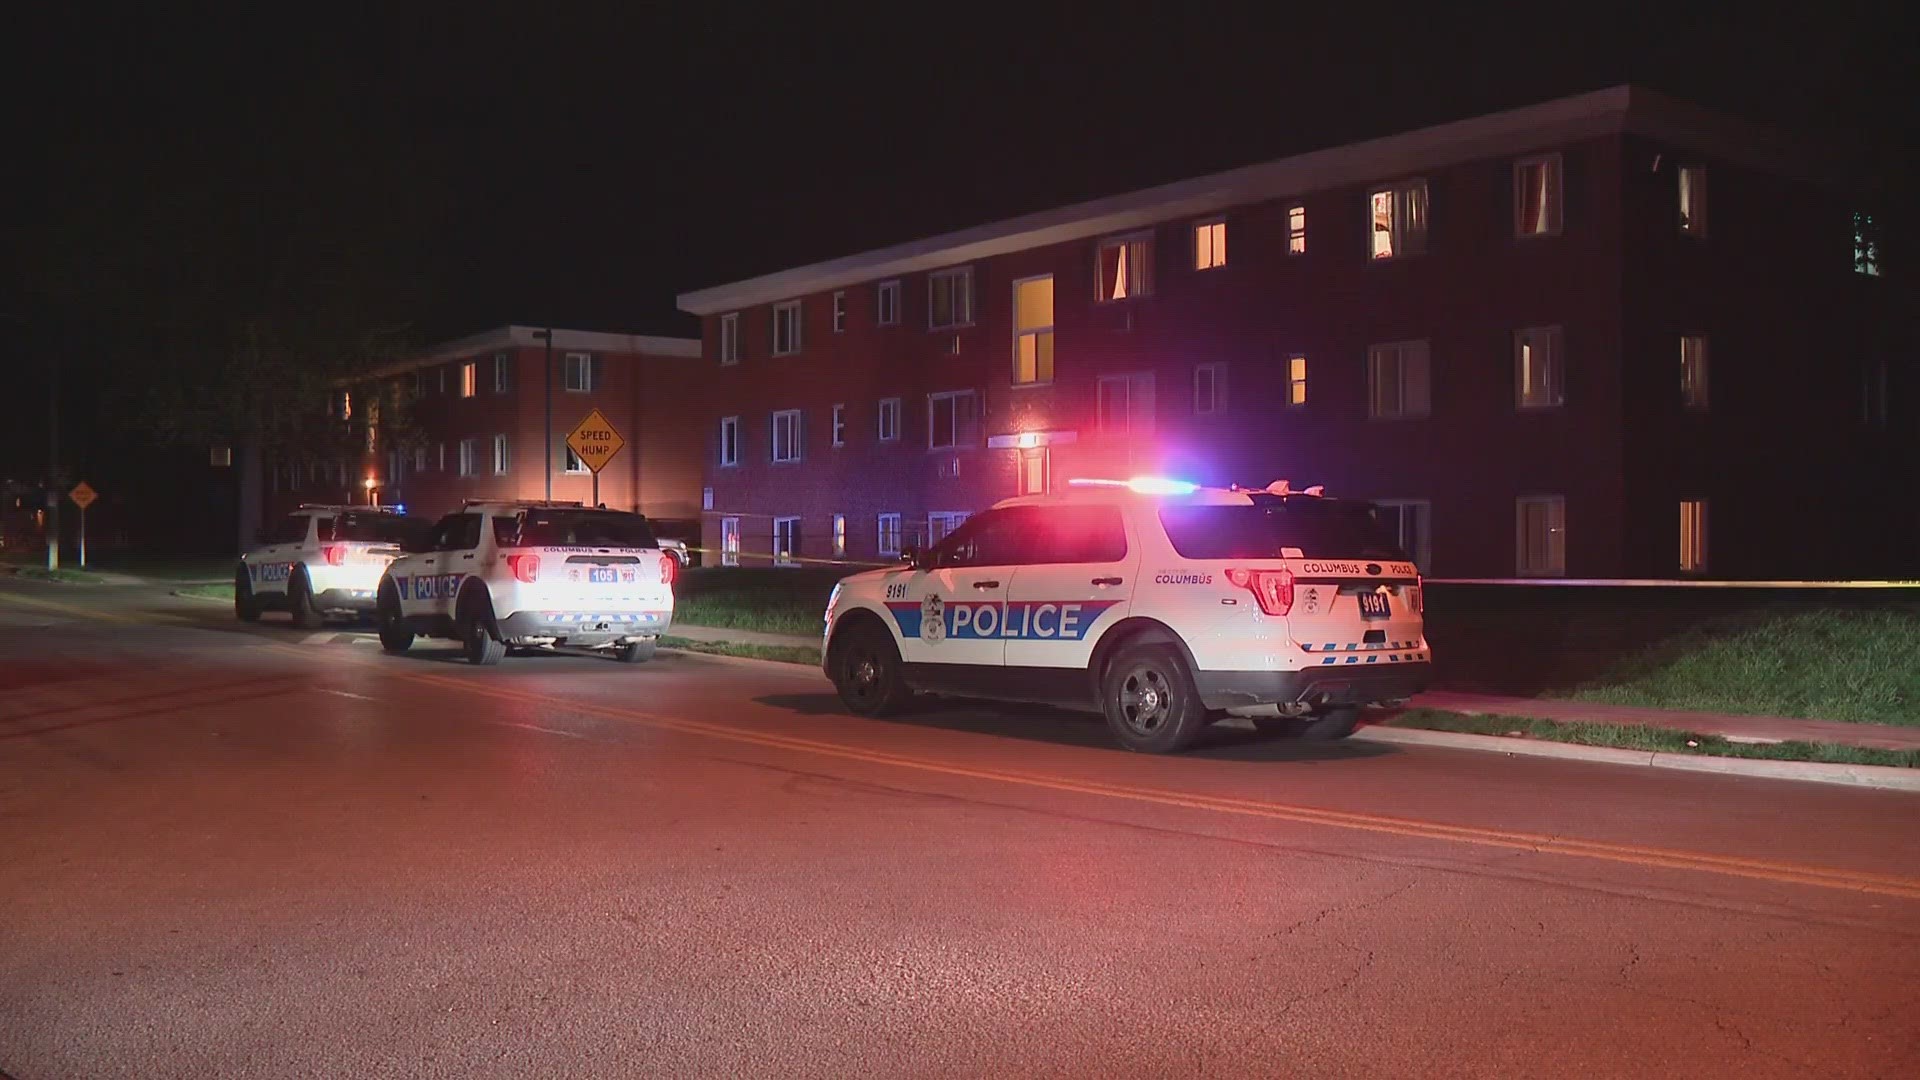 The city is working to add more security measures to the troubled apartment complex.